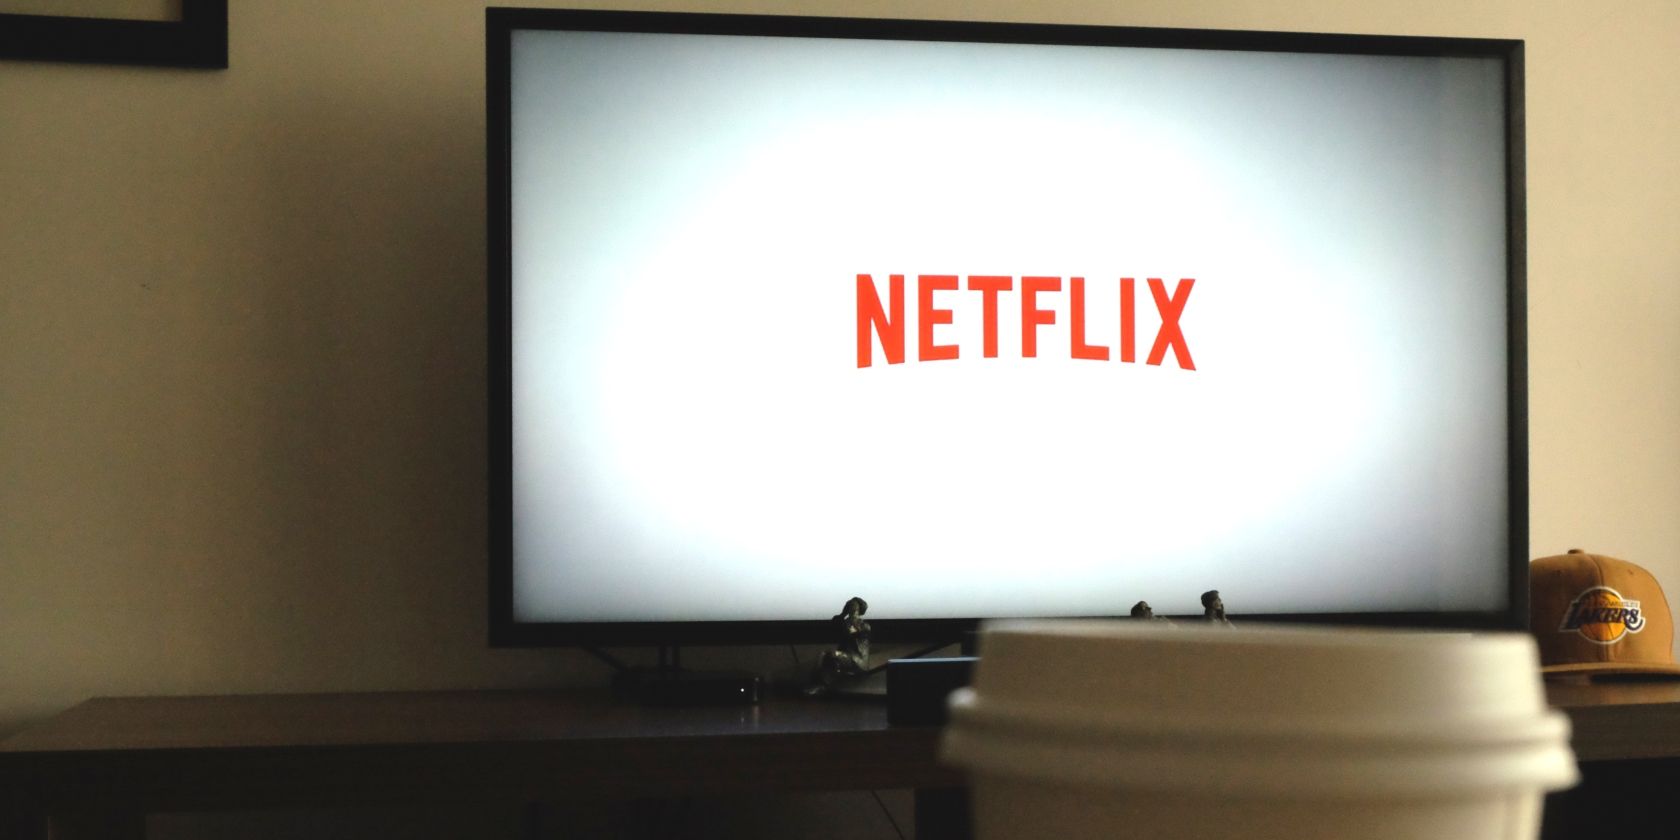 Netflix Offers More Hit Movies Than Amazon, Hulu, and HBO